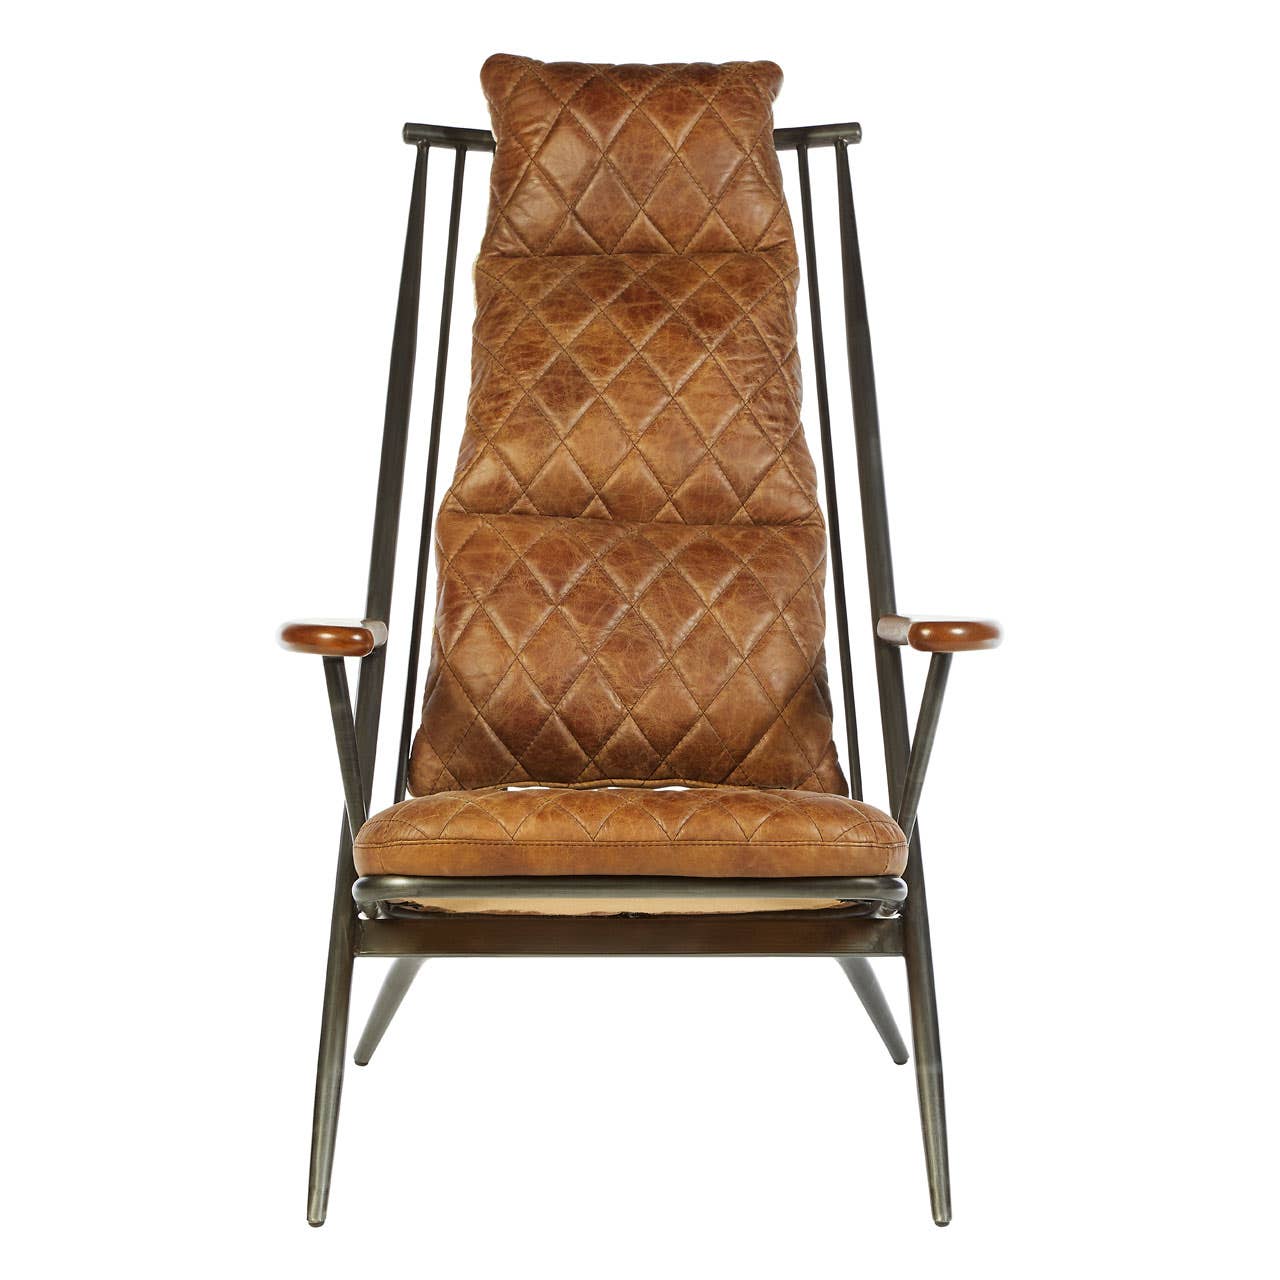 Hoxton Light Brown Leather Chair